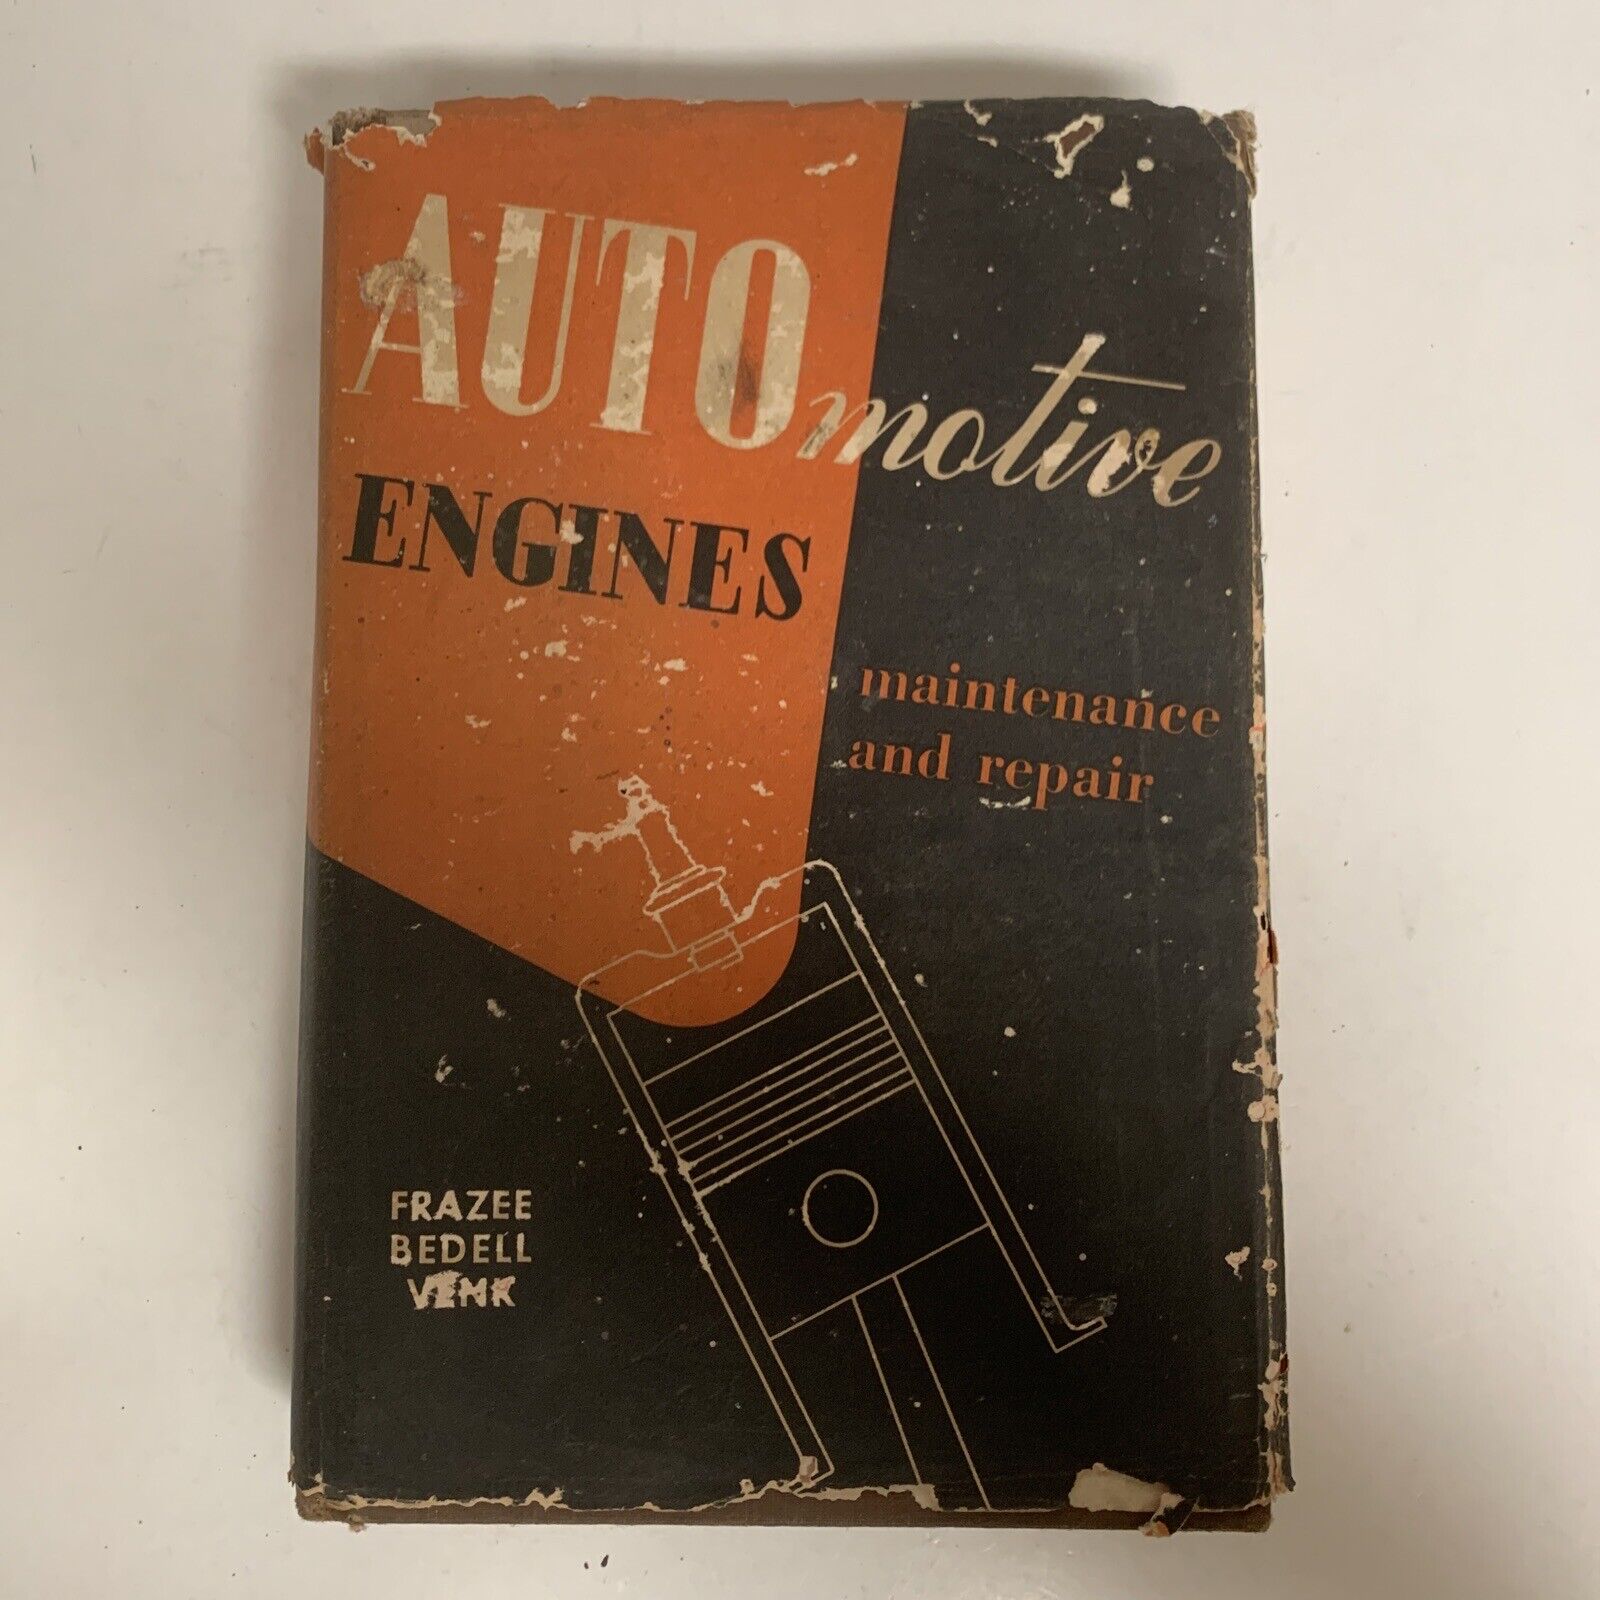 Automotive Engines - Maintenance And Repairs - Frazee Bedell Vent - American 